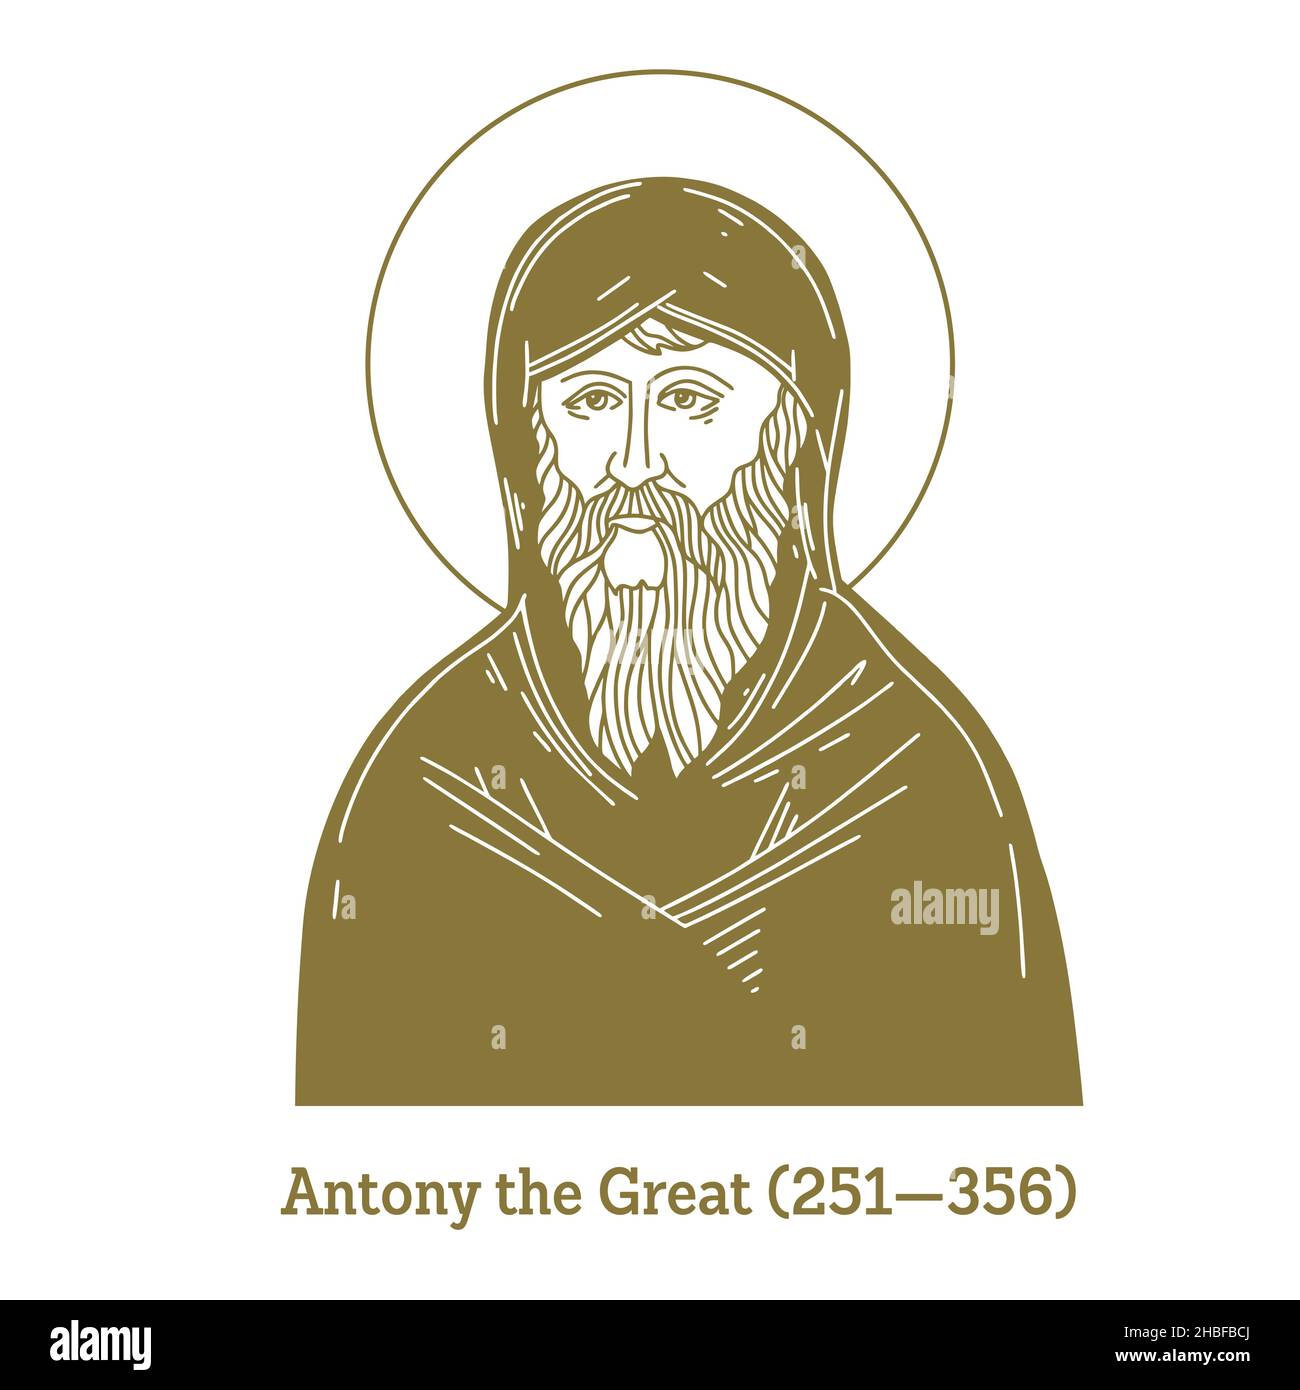 Antony the Great (251-356) was a Christian monk from Egypt, revered since his death as a saint. For his importance among the Desert Fathers Stock Vector